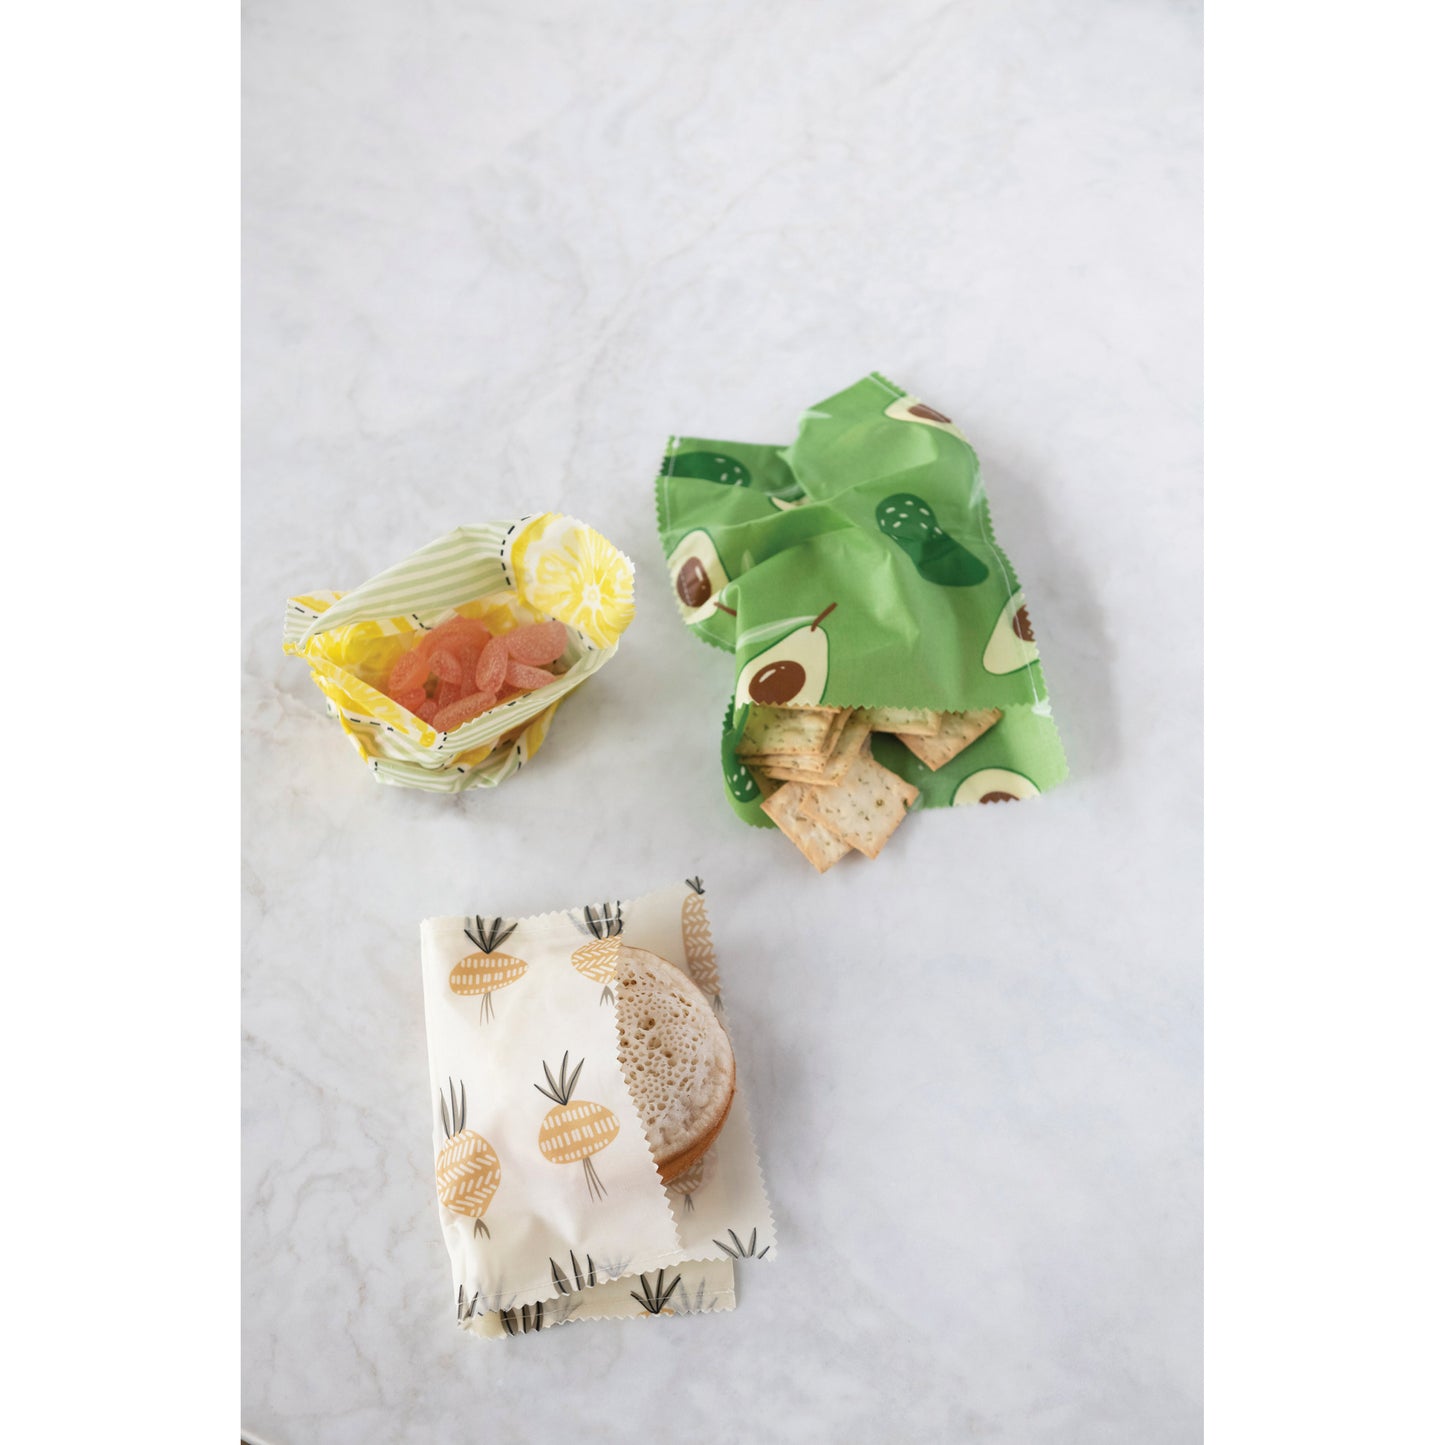 Reusable Fabric Beeswax Food Bags with Prints, Set of 2